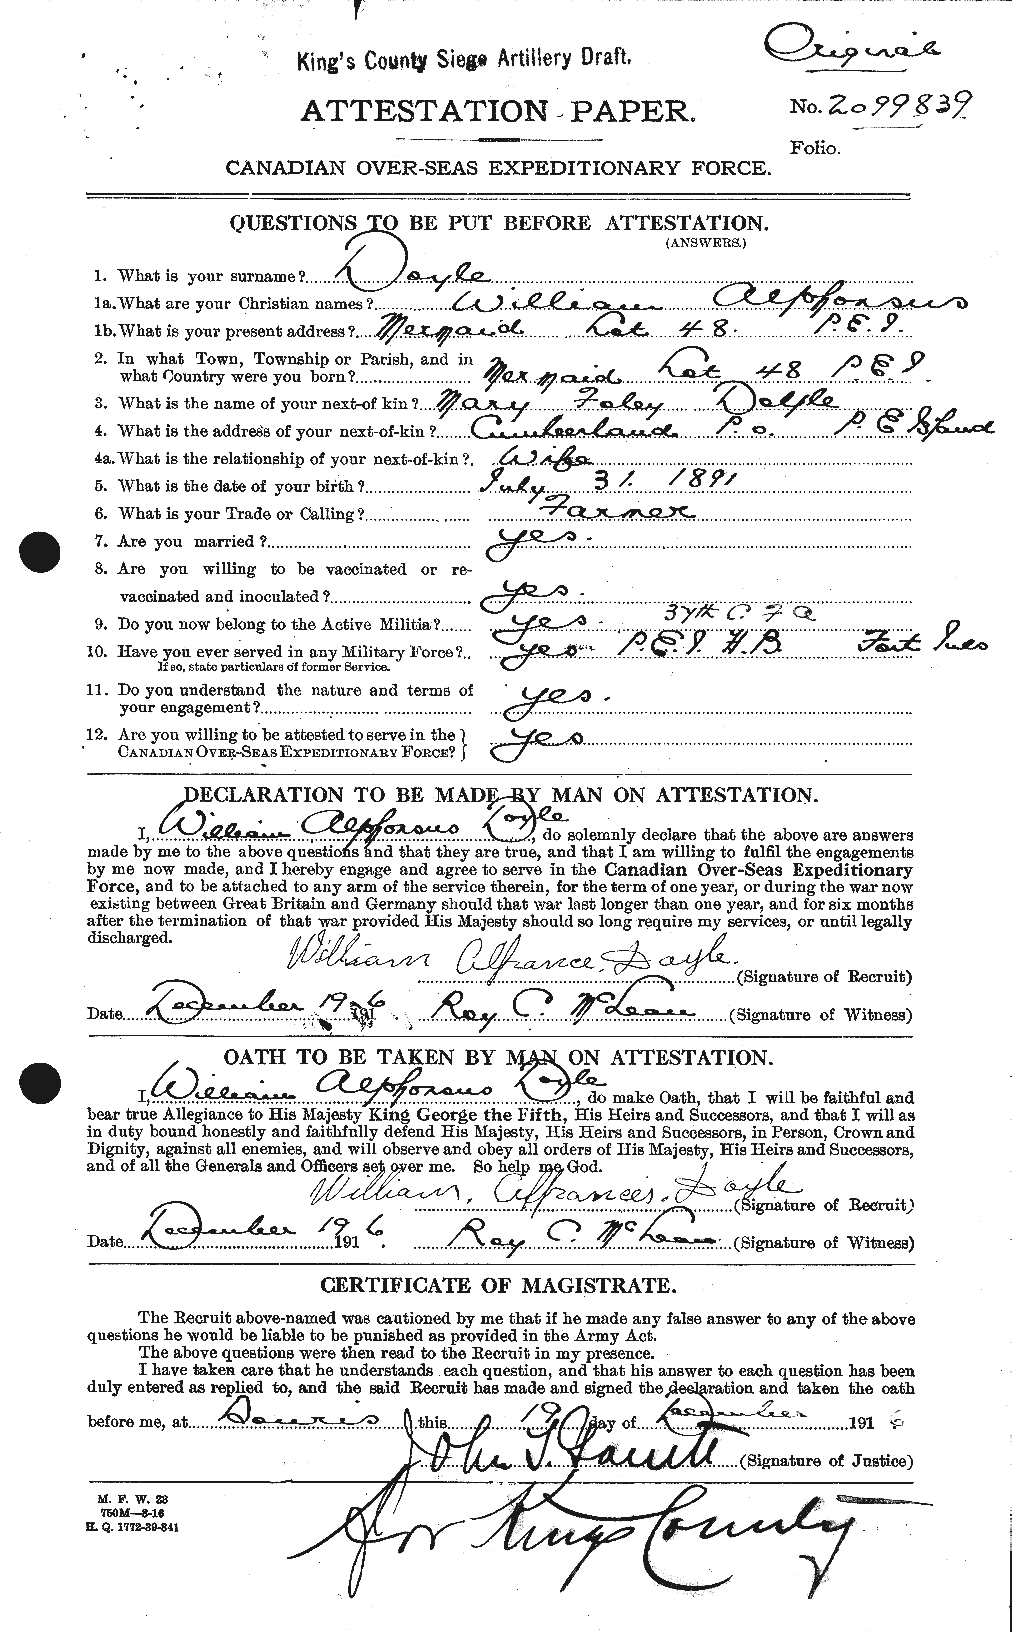 Personnel Records of the First World War - CEF 297950a